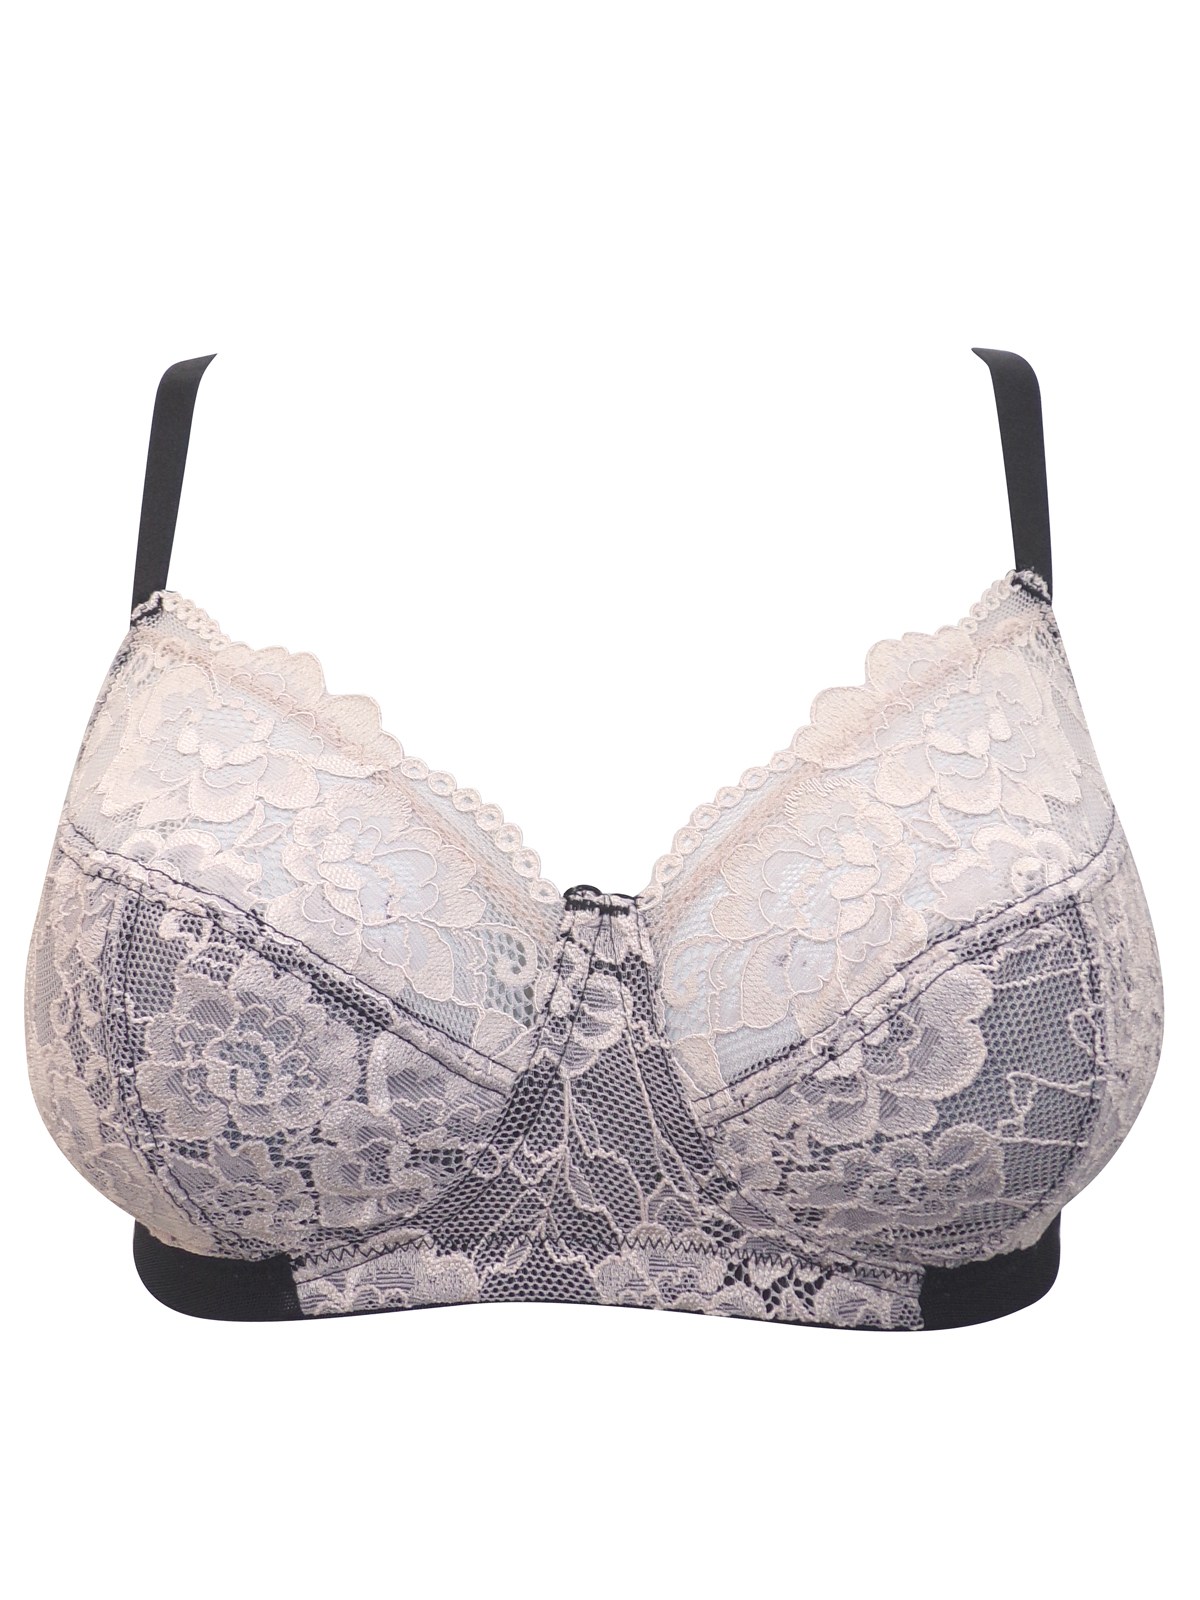 Marks and Spencer - - M&5 BLACK-NUDE Contrast Isabella Lace Non-Wired ...